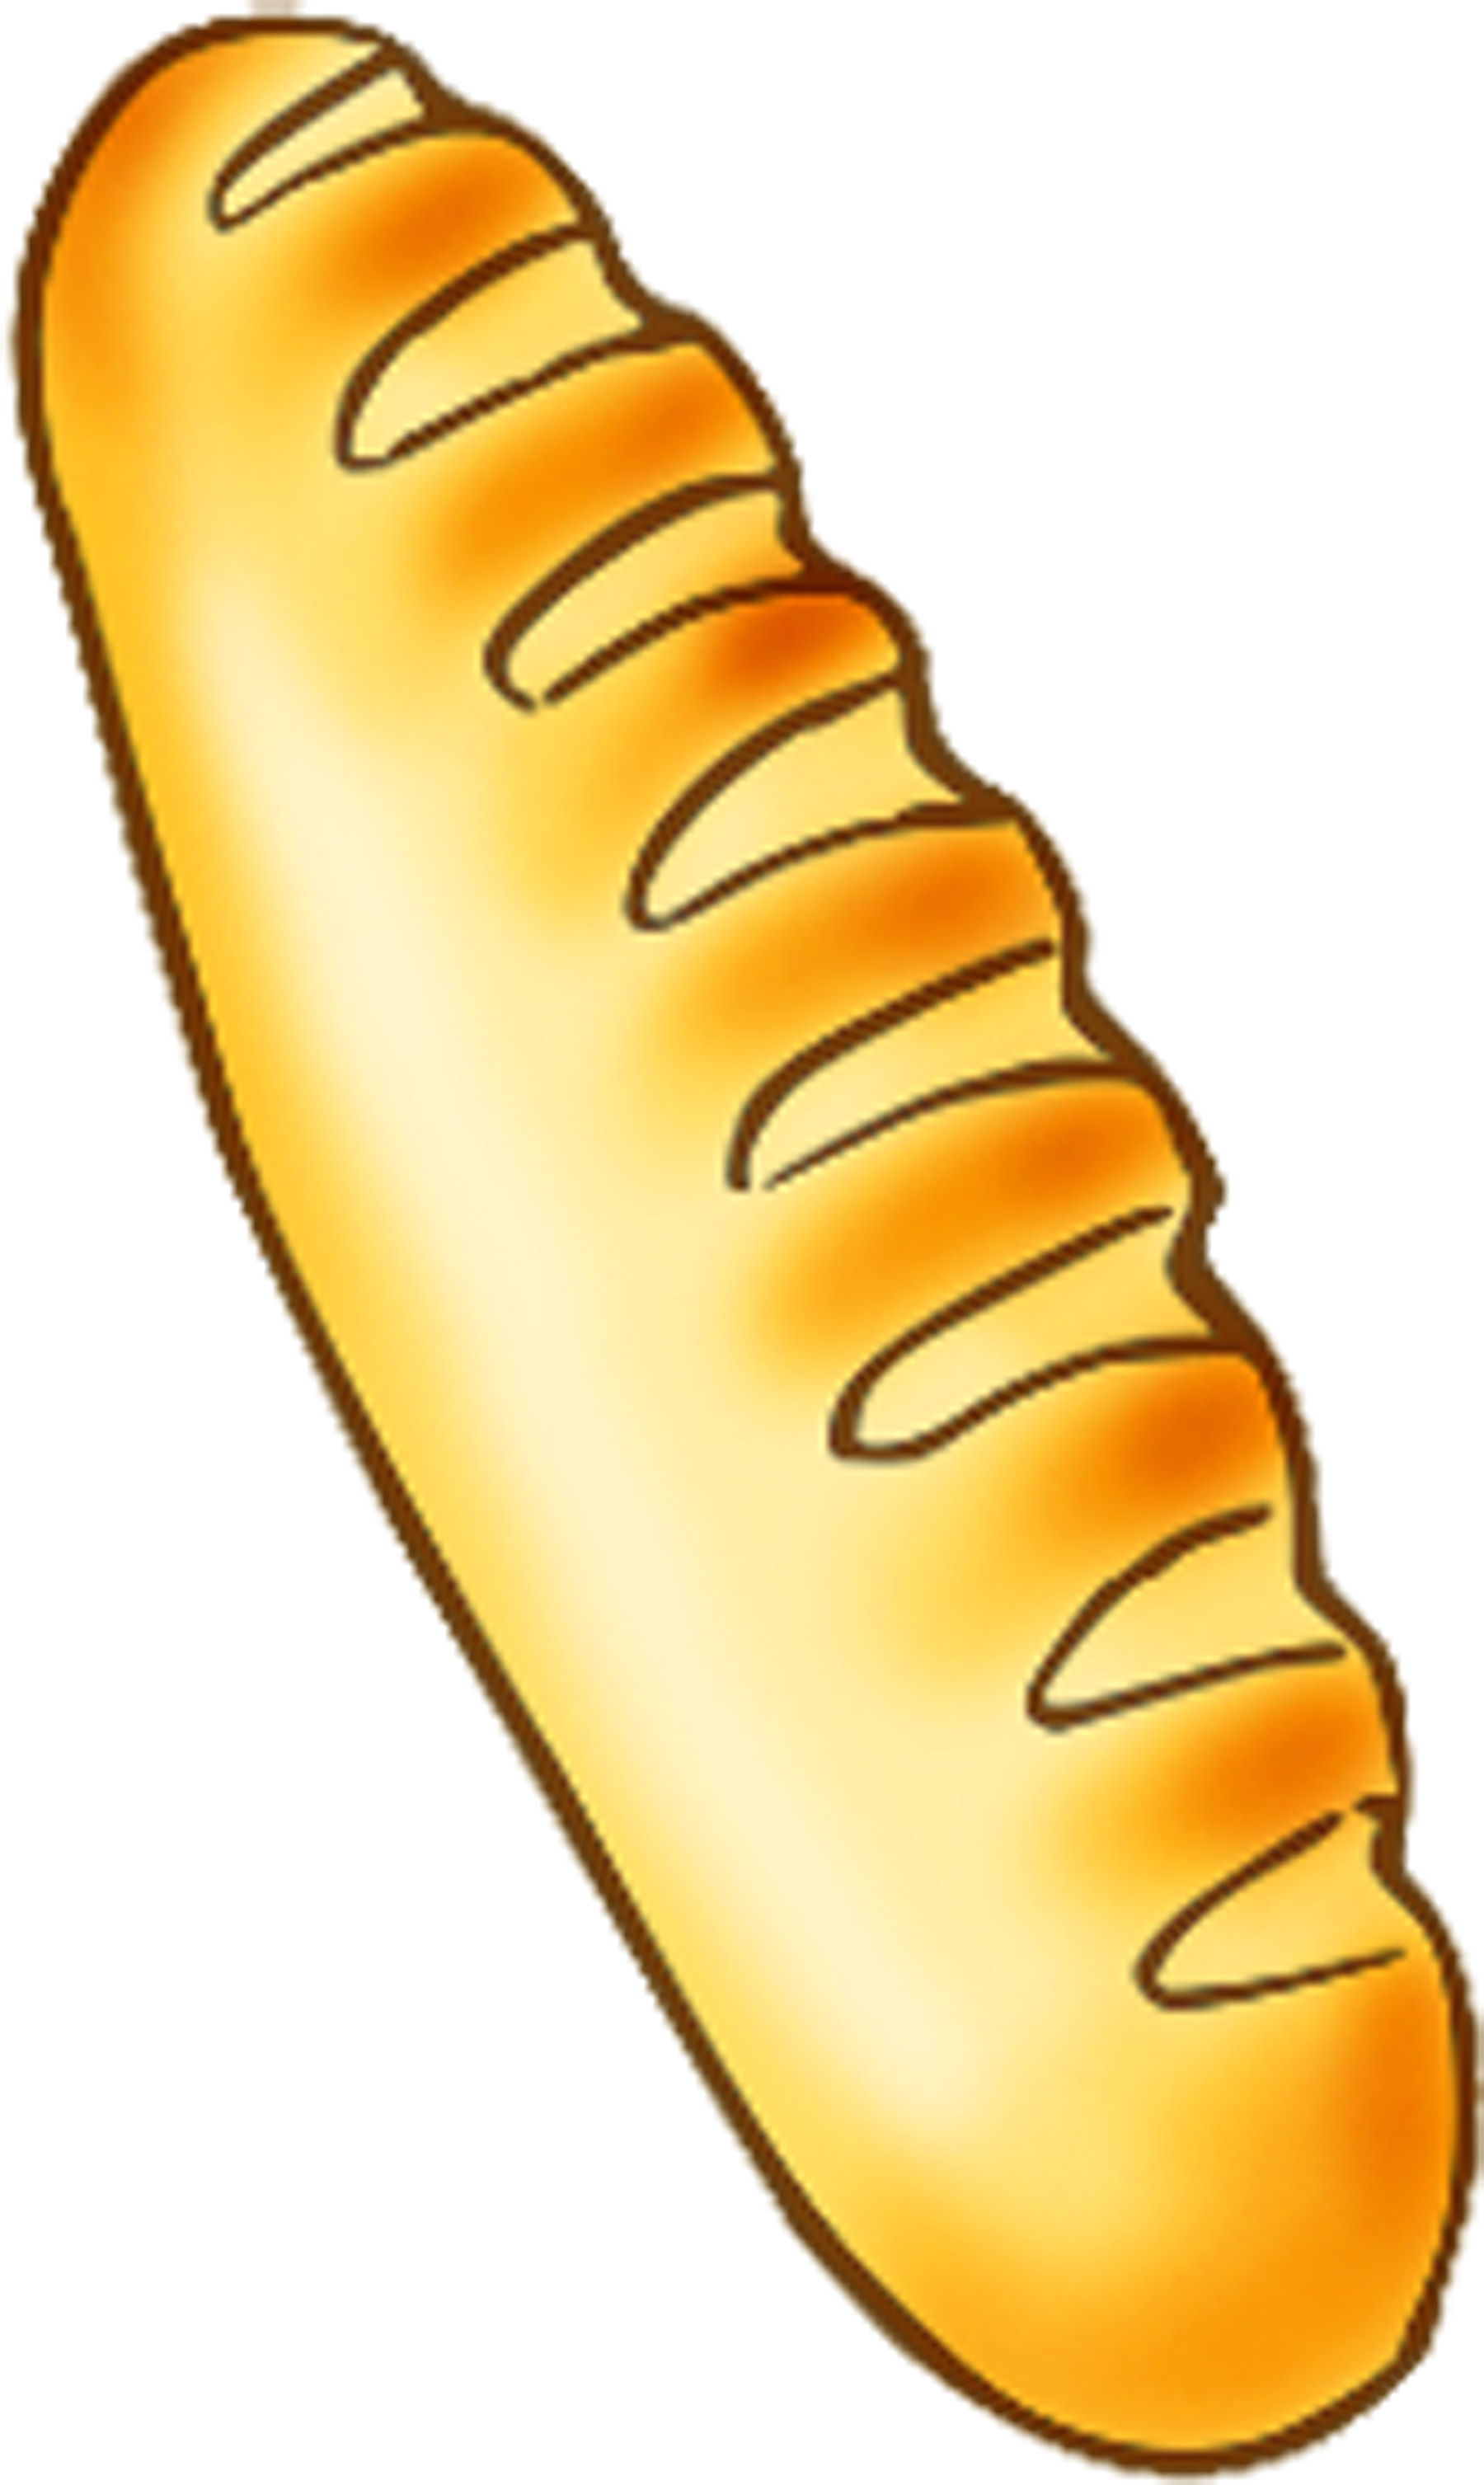 Bread clip art free vector for download about 4